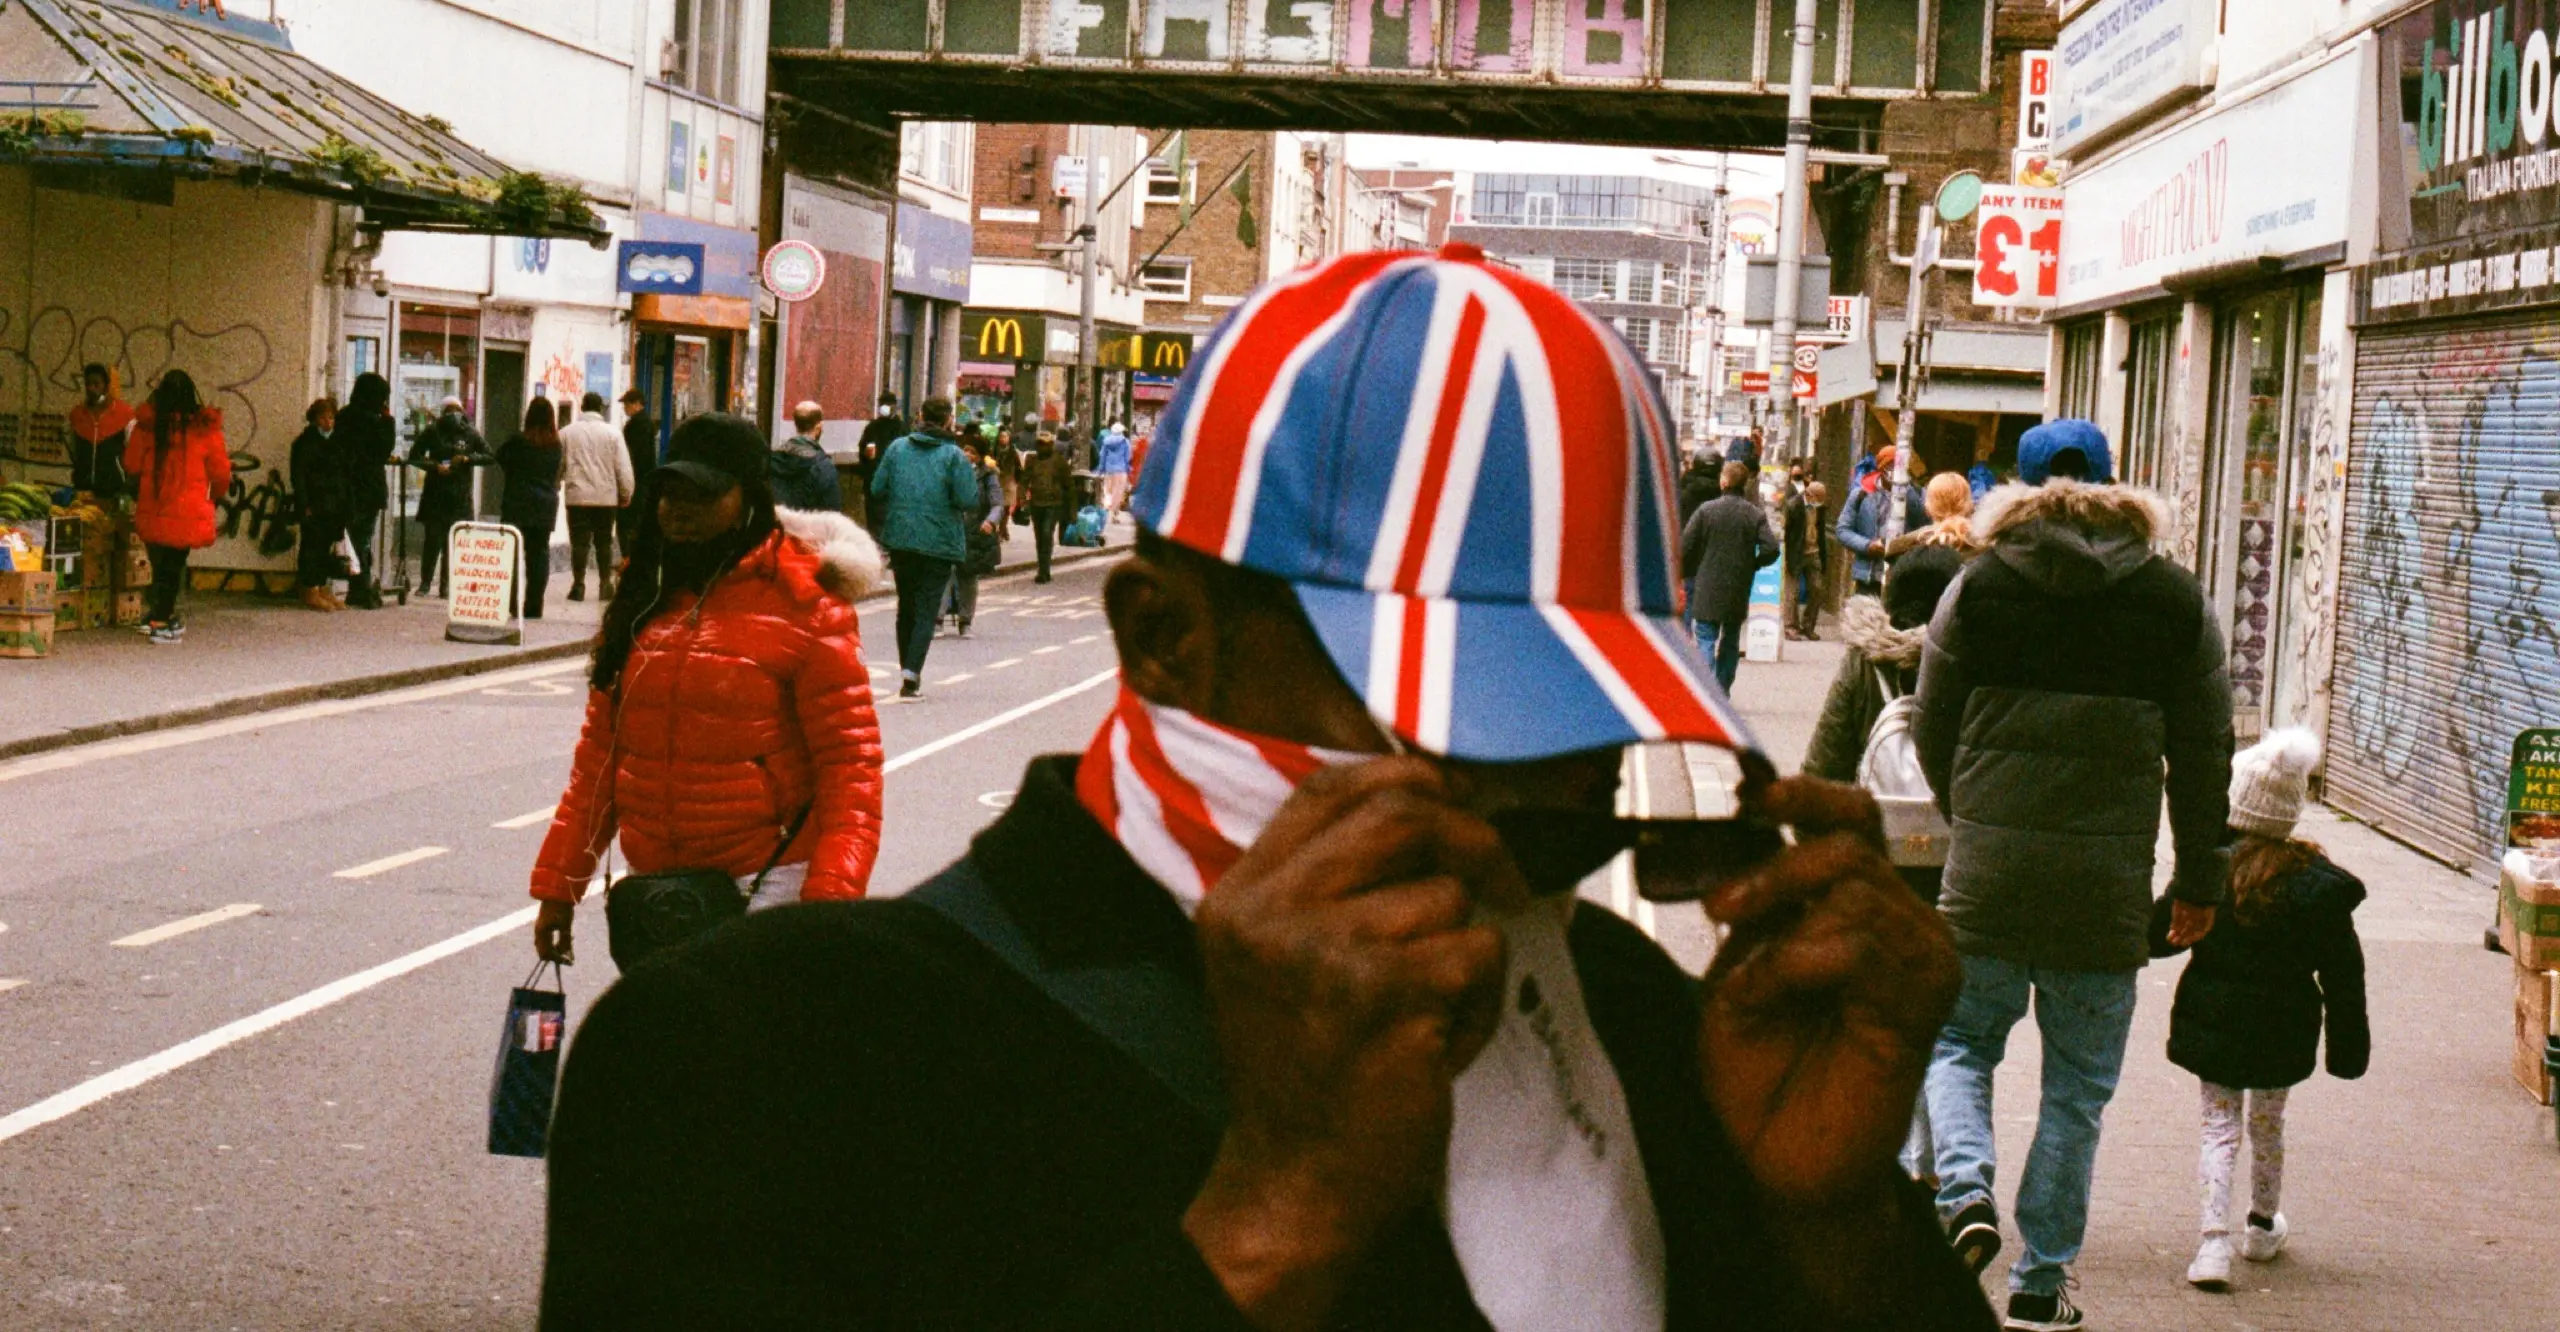 Image of a person wearing a Union Jack hat on a street in Peckham